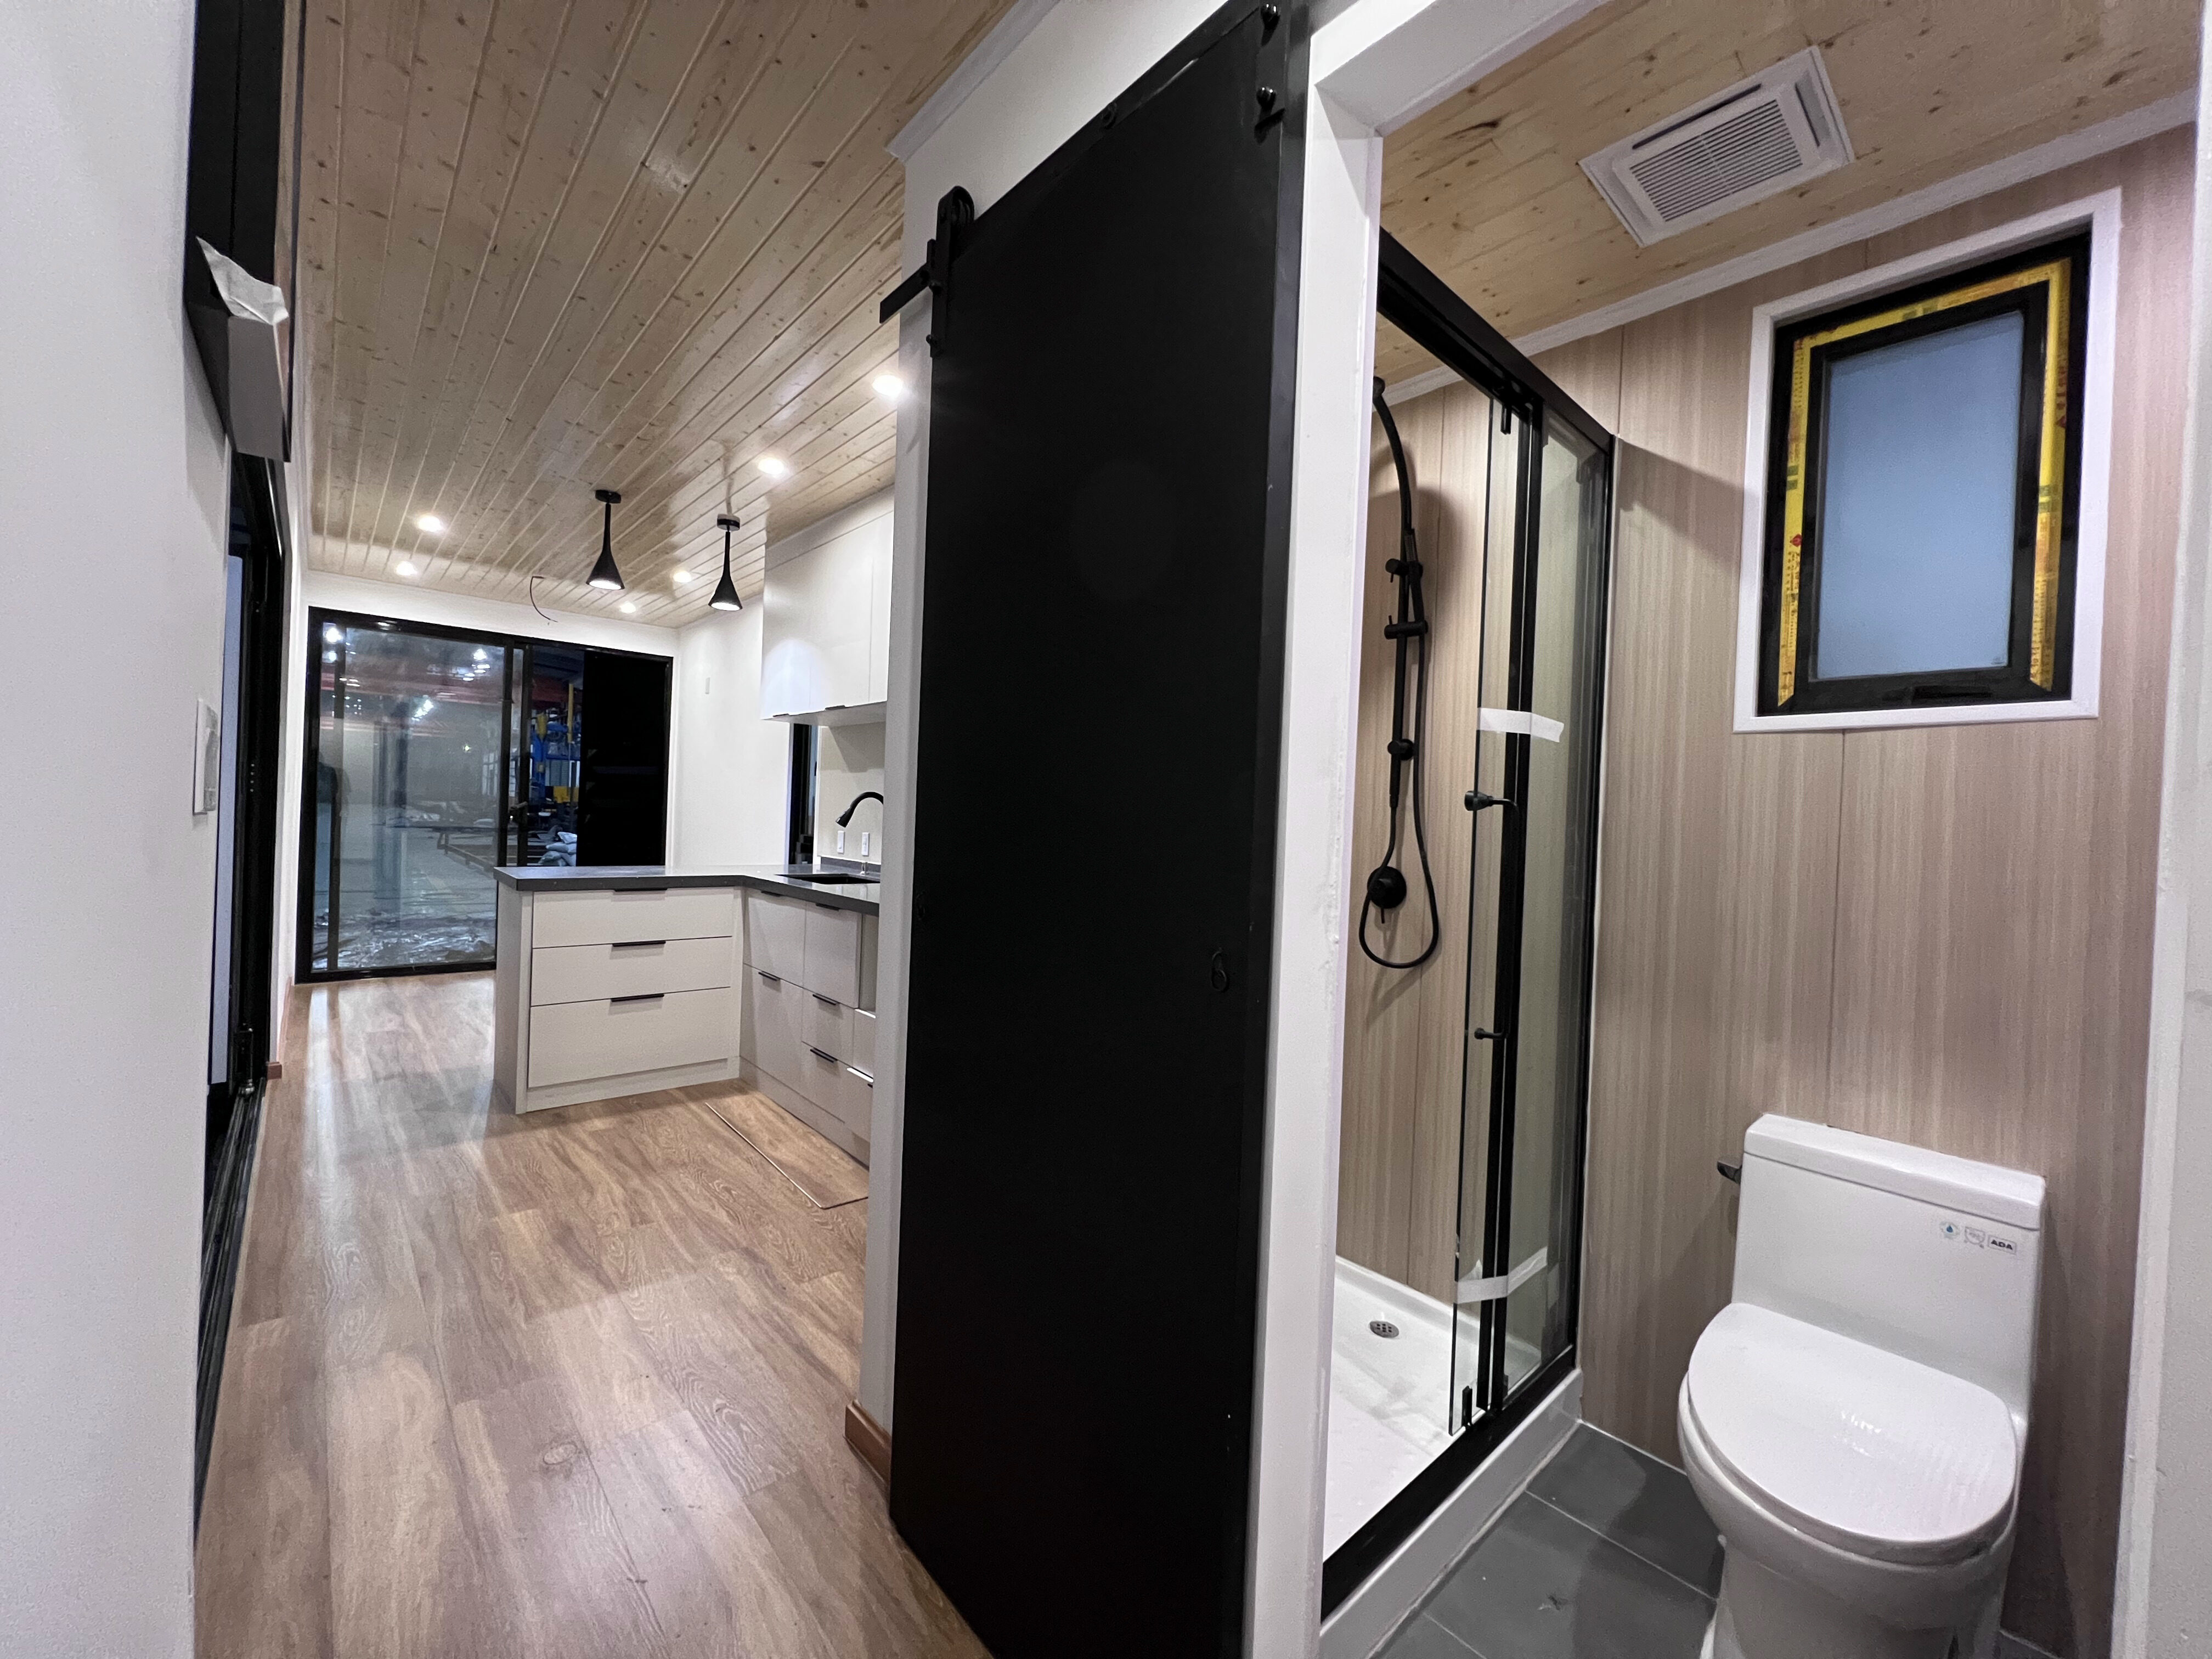 40ft luxury house container homes manufacturer, 40ft luxury house container homes factory, 40ft luxury house container homes supplier, 40ft luxury house container homes export, 40ft luxury house container homes china